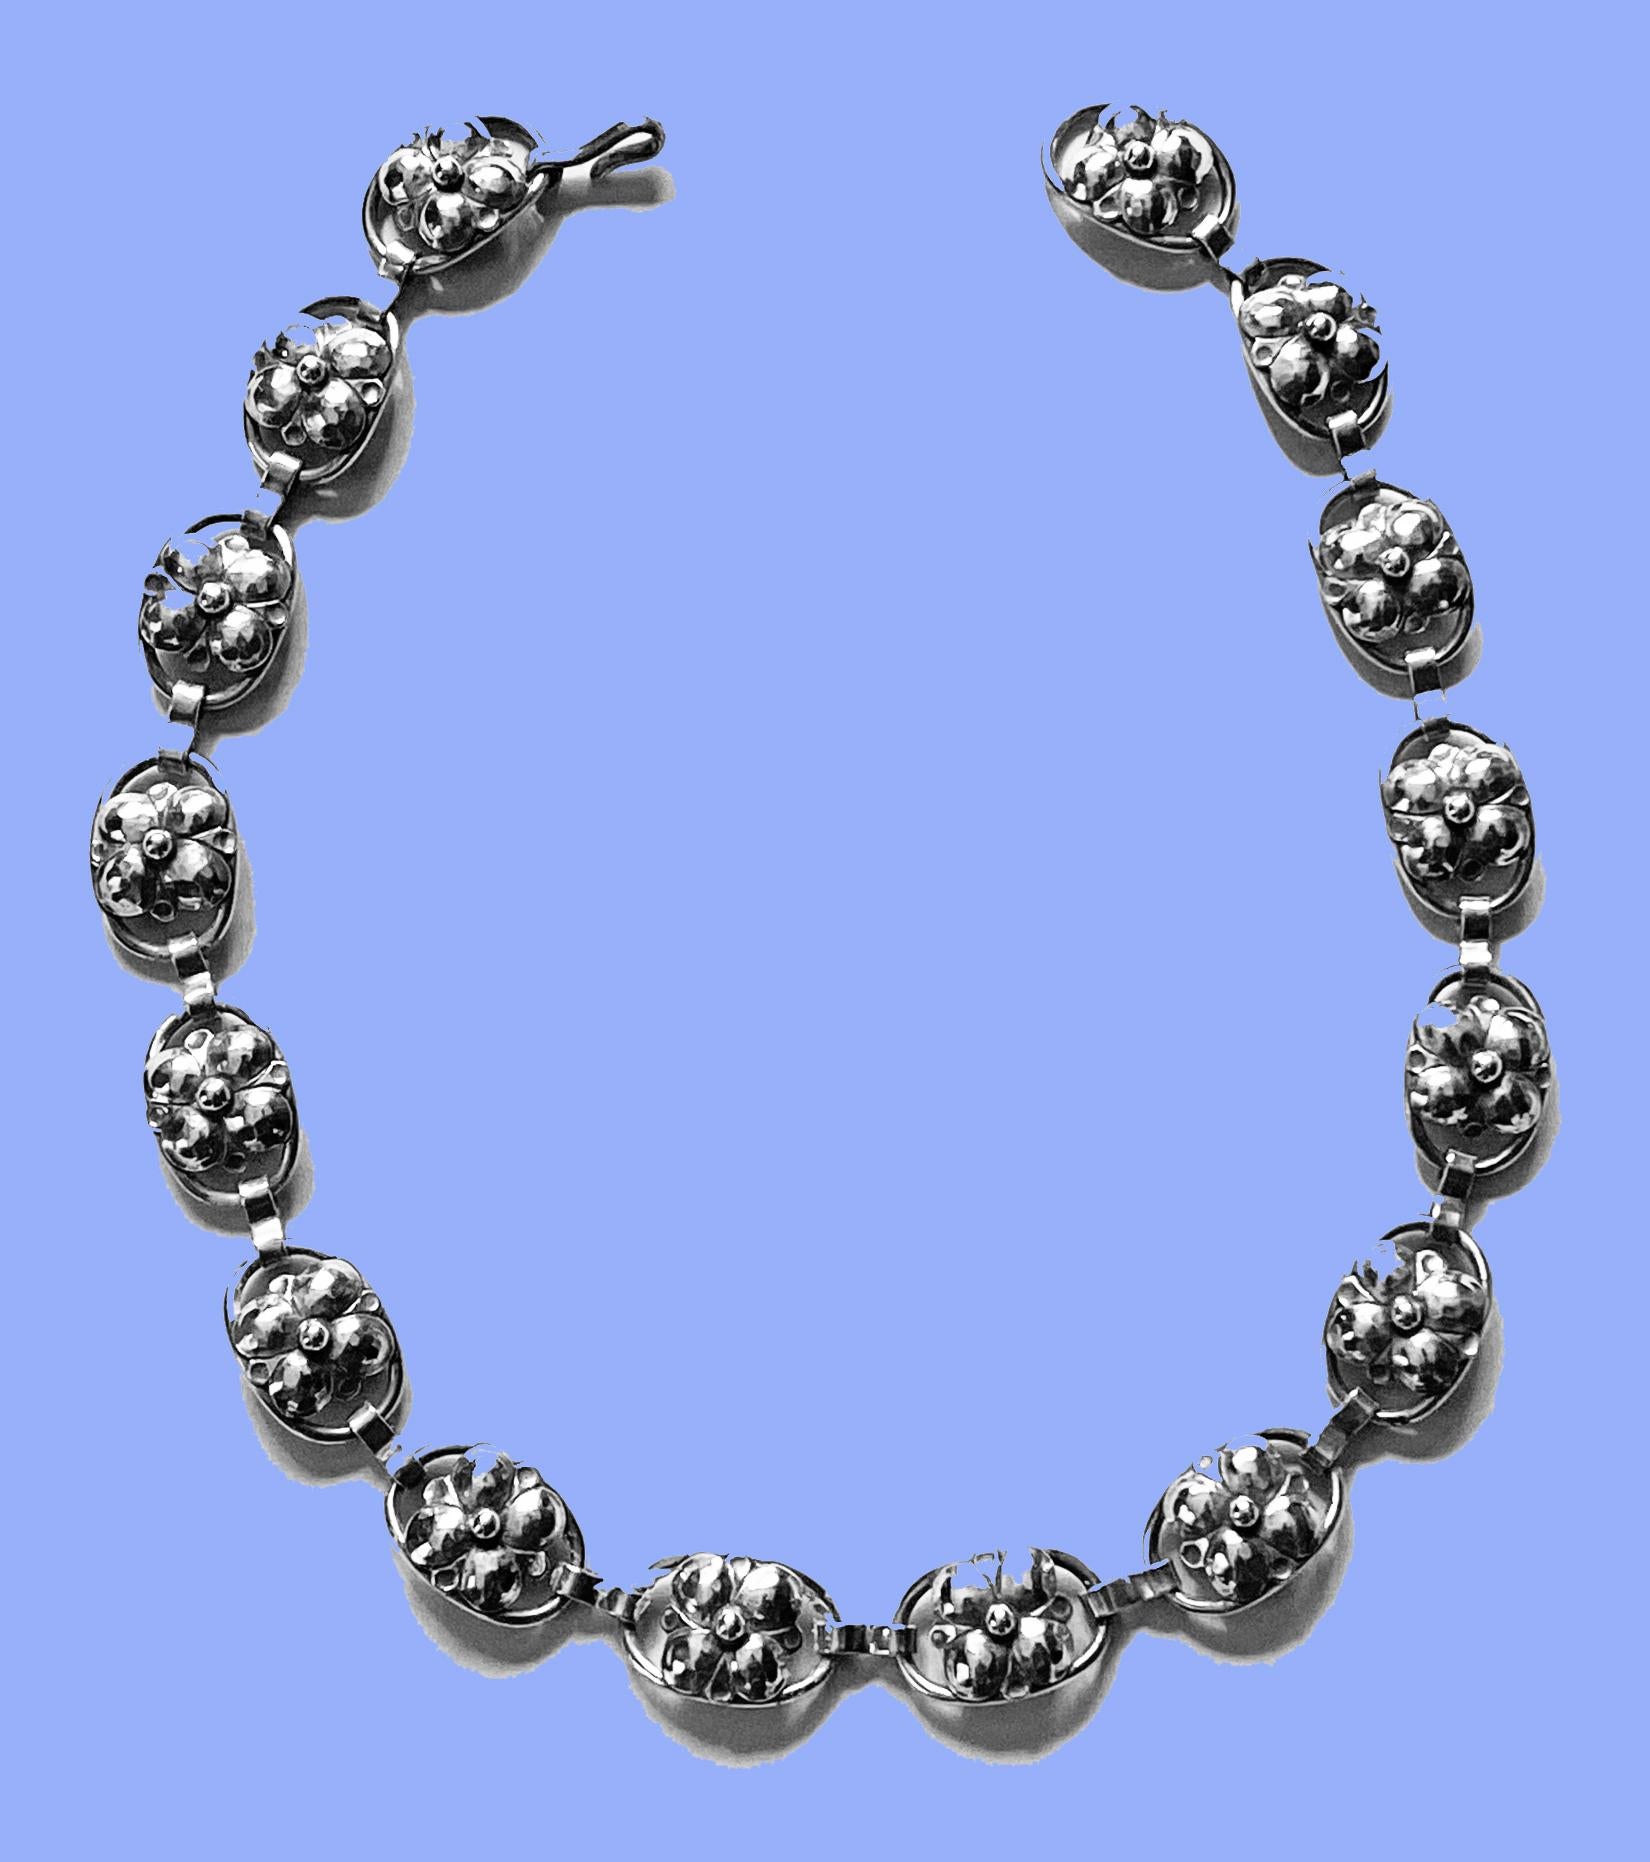 Georg Jensen Inc hand made Sterling Silver Necklace, American C.1940. The Necklace with sixteen organic rosette foliate bud motif links, hook fastener. Reverse with marks USA Georg Jensen Inc handwrought Sterling with design number 809A. Length: